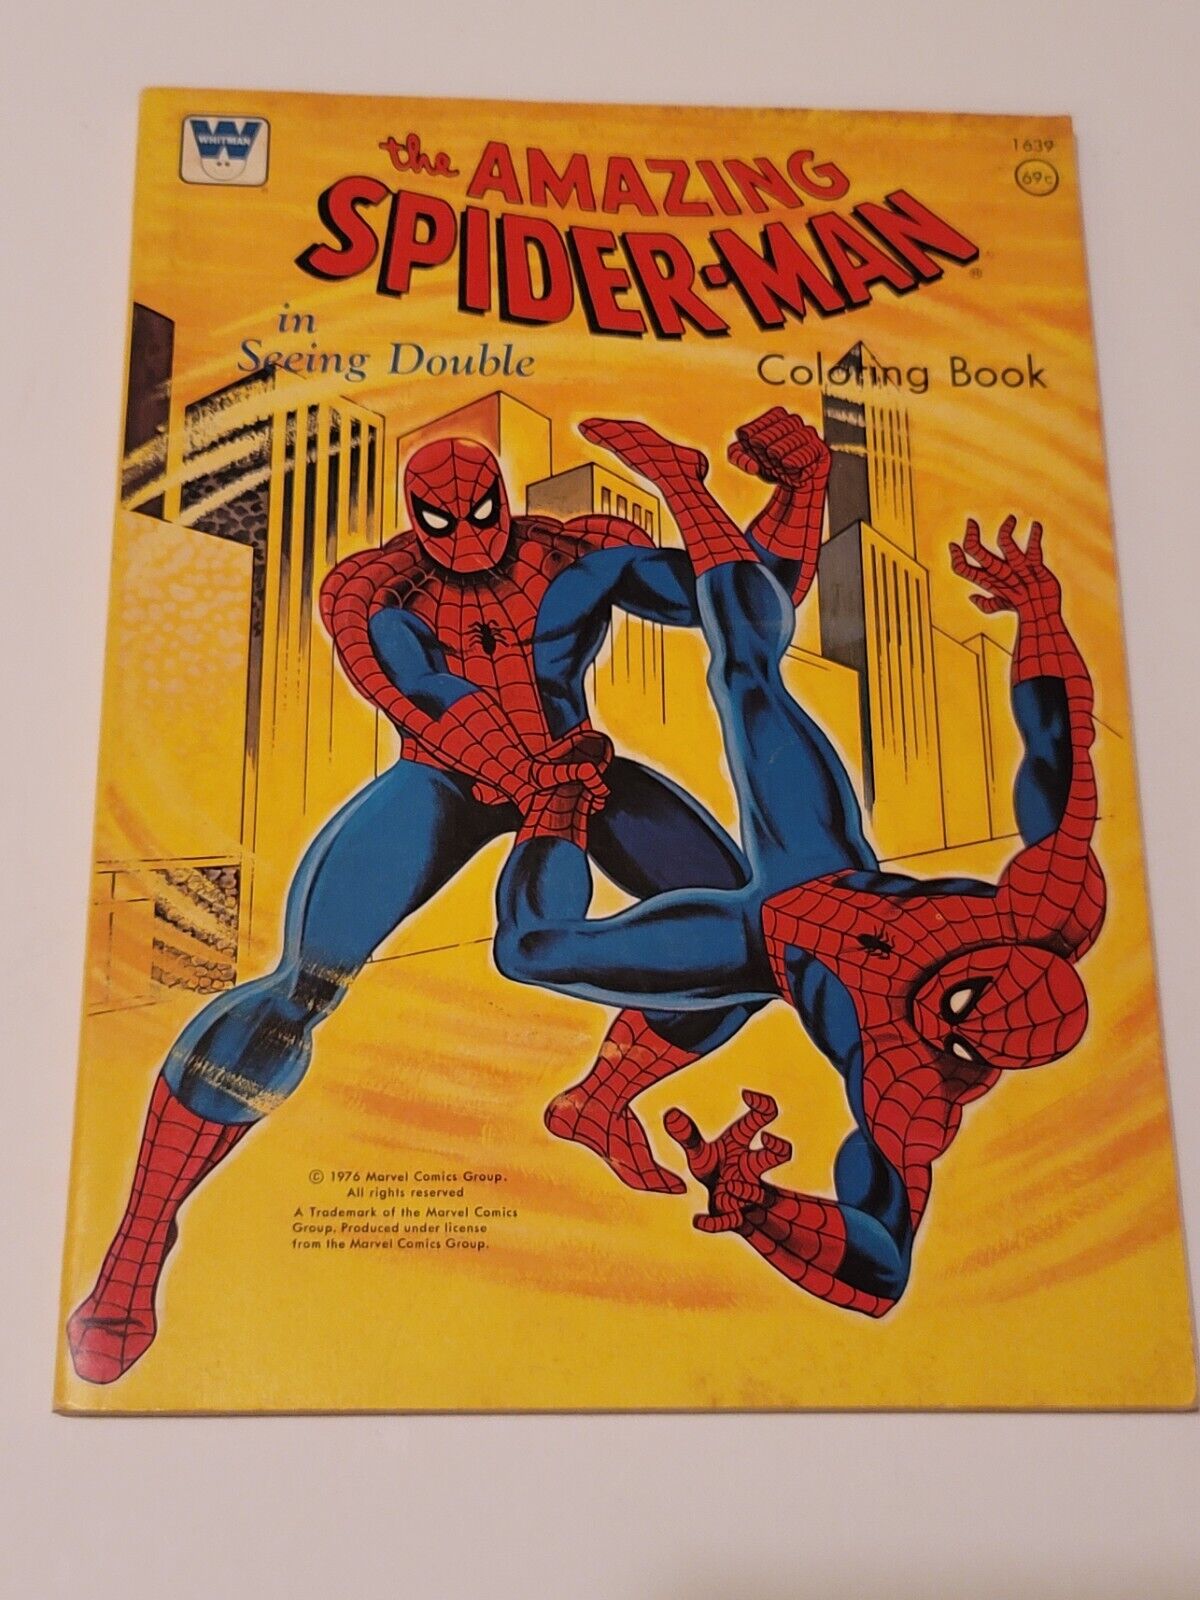 THE AMAZING SPIDERMAN IN SEEING DOUBLE COLORING BOOK WHITMAN 1976 MARVEL COMICS